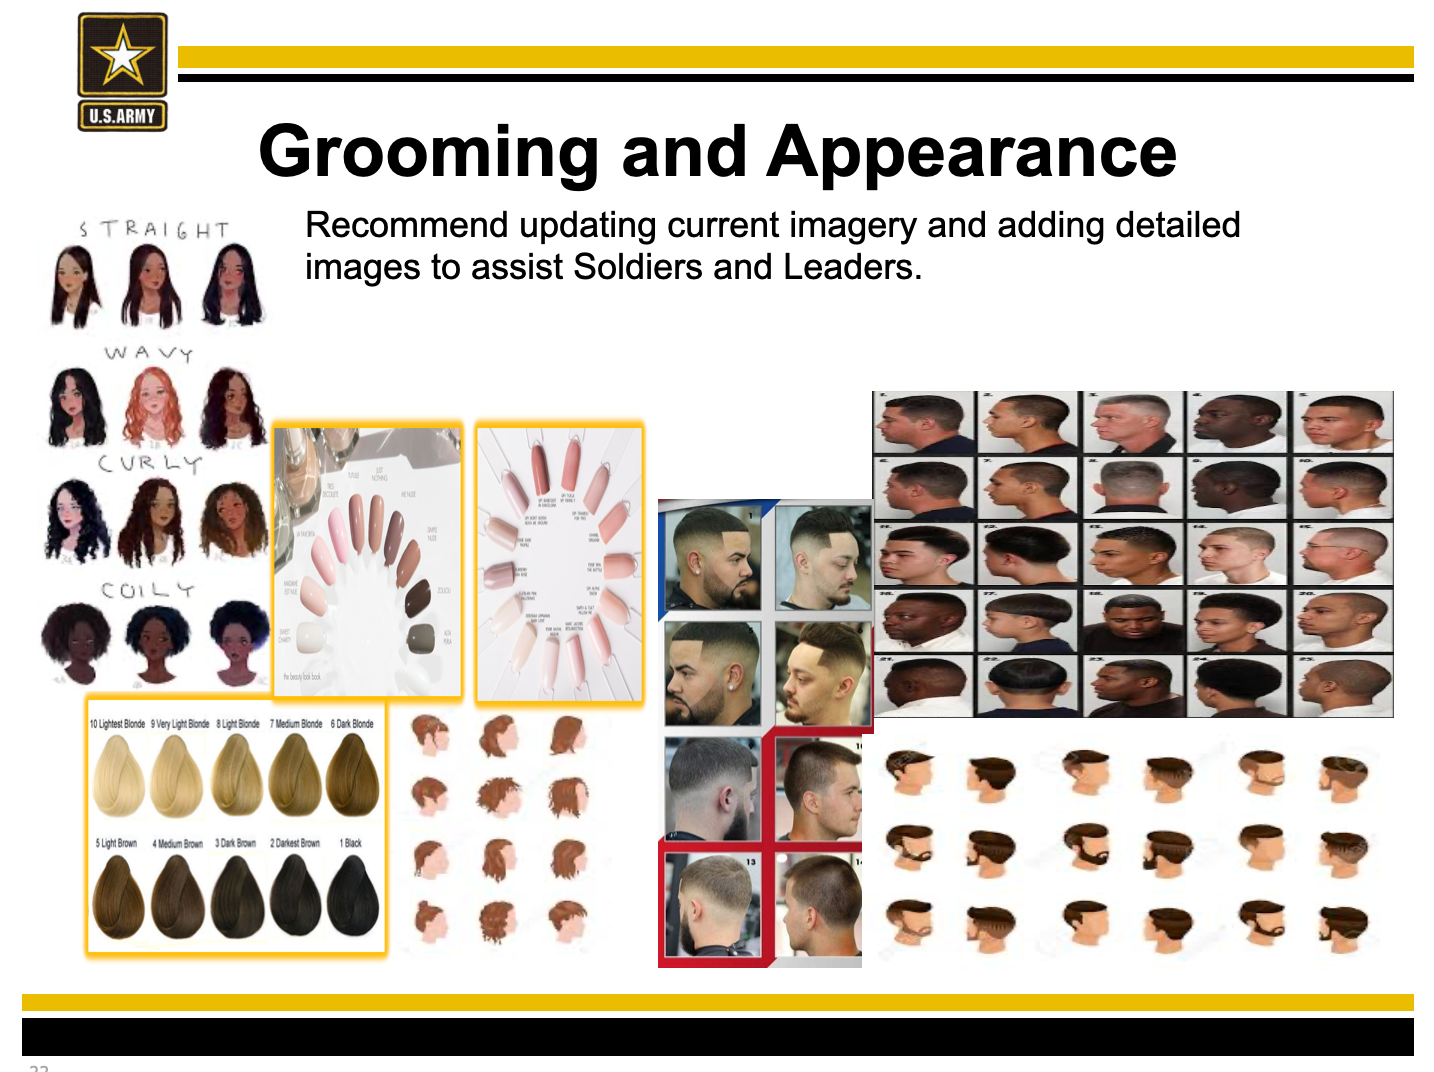 Army Regulation 670-1: Nail Polish and Grooming Standards - wide 8